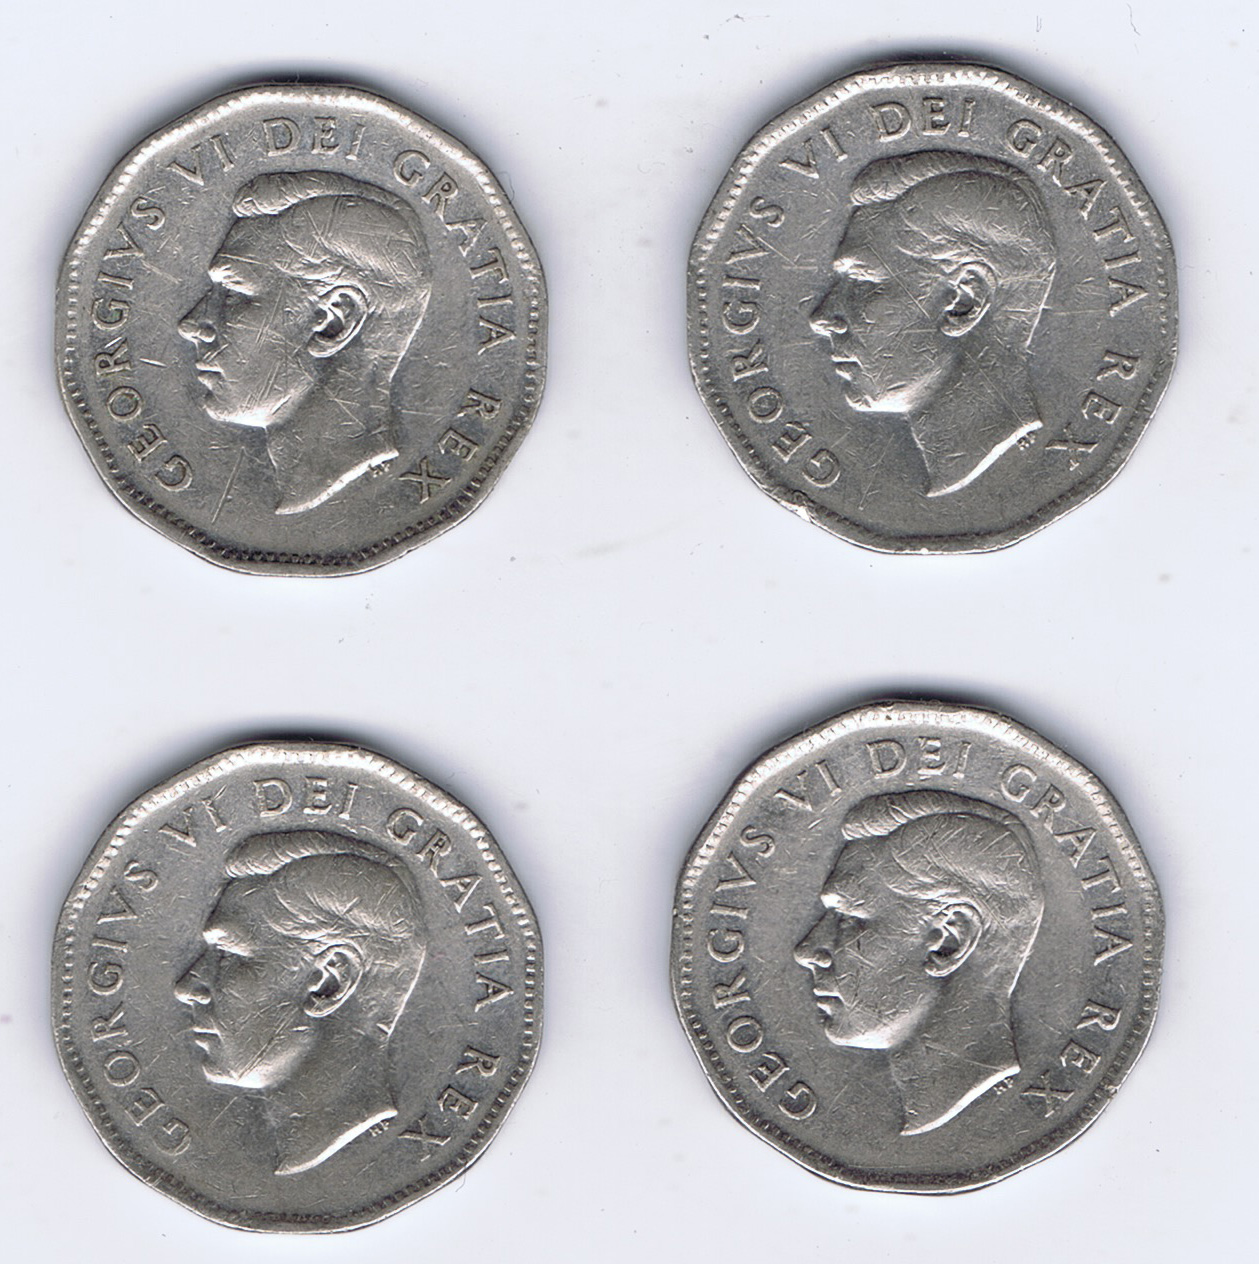 Canada 1950 Nickel Pictures George VI & Beaver - Roll of 40